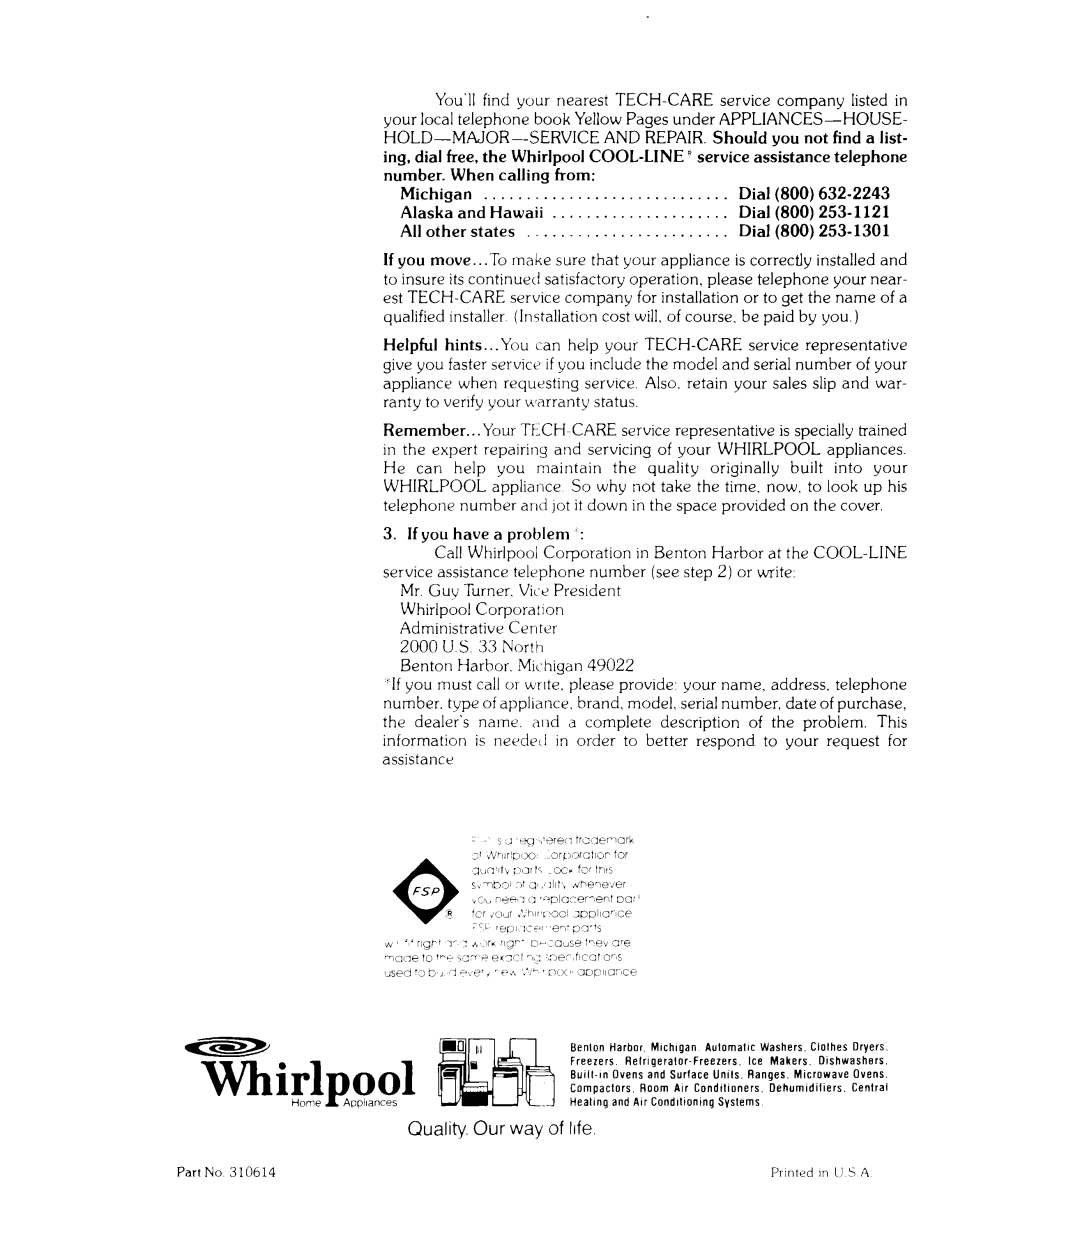 Whirlpool RJE-362B manual T&lpool, Quality. Our way of life 